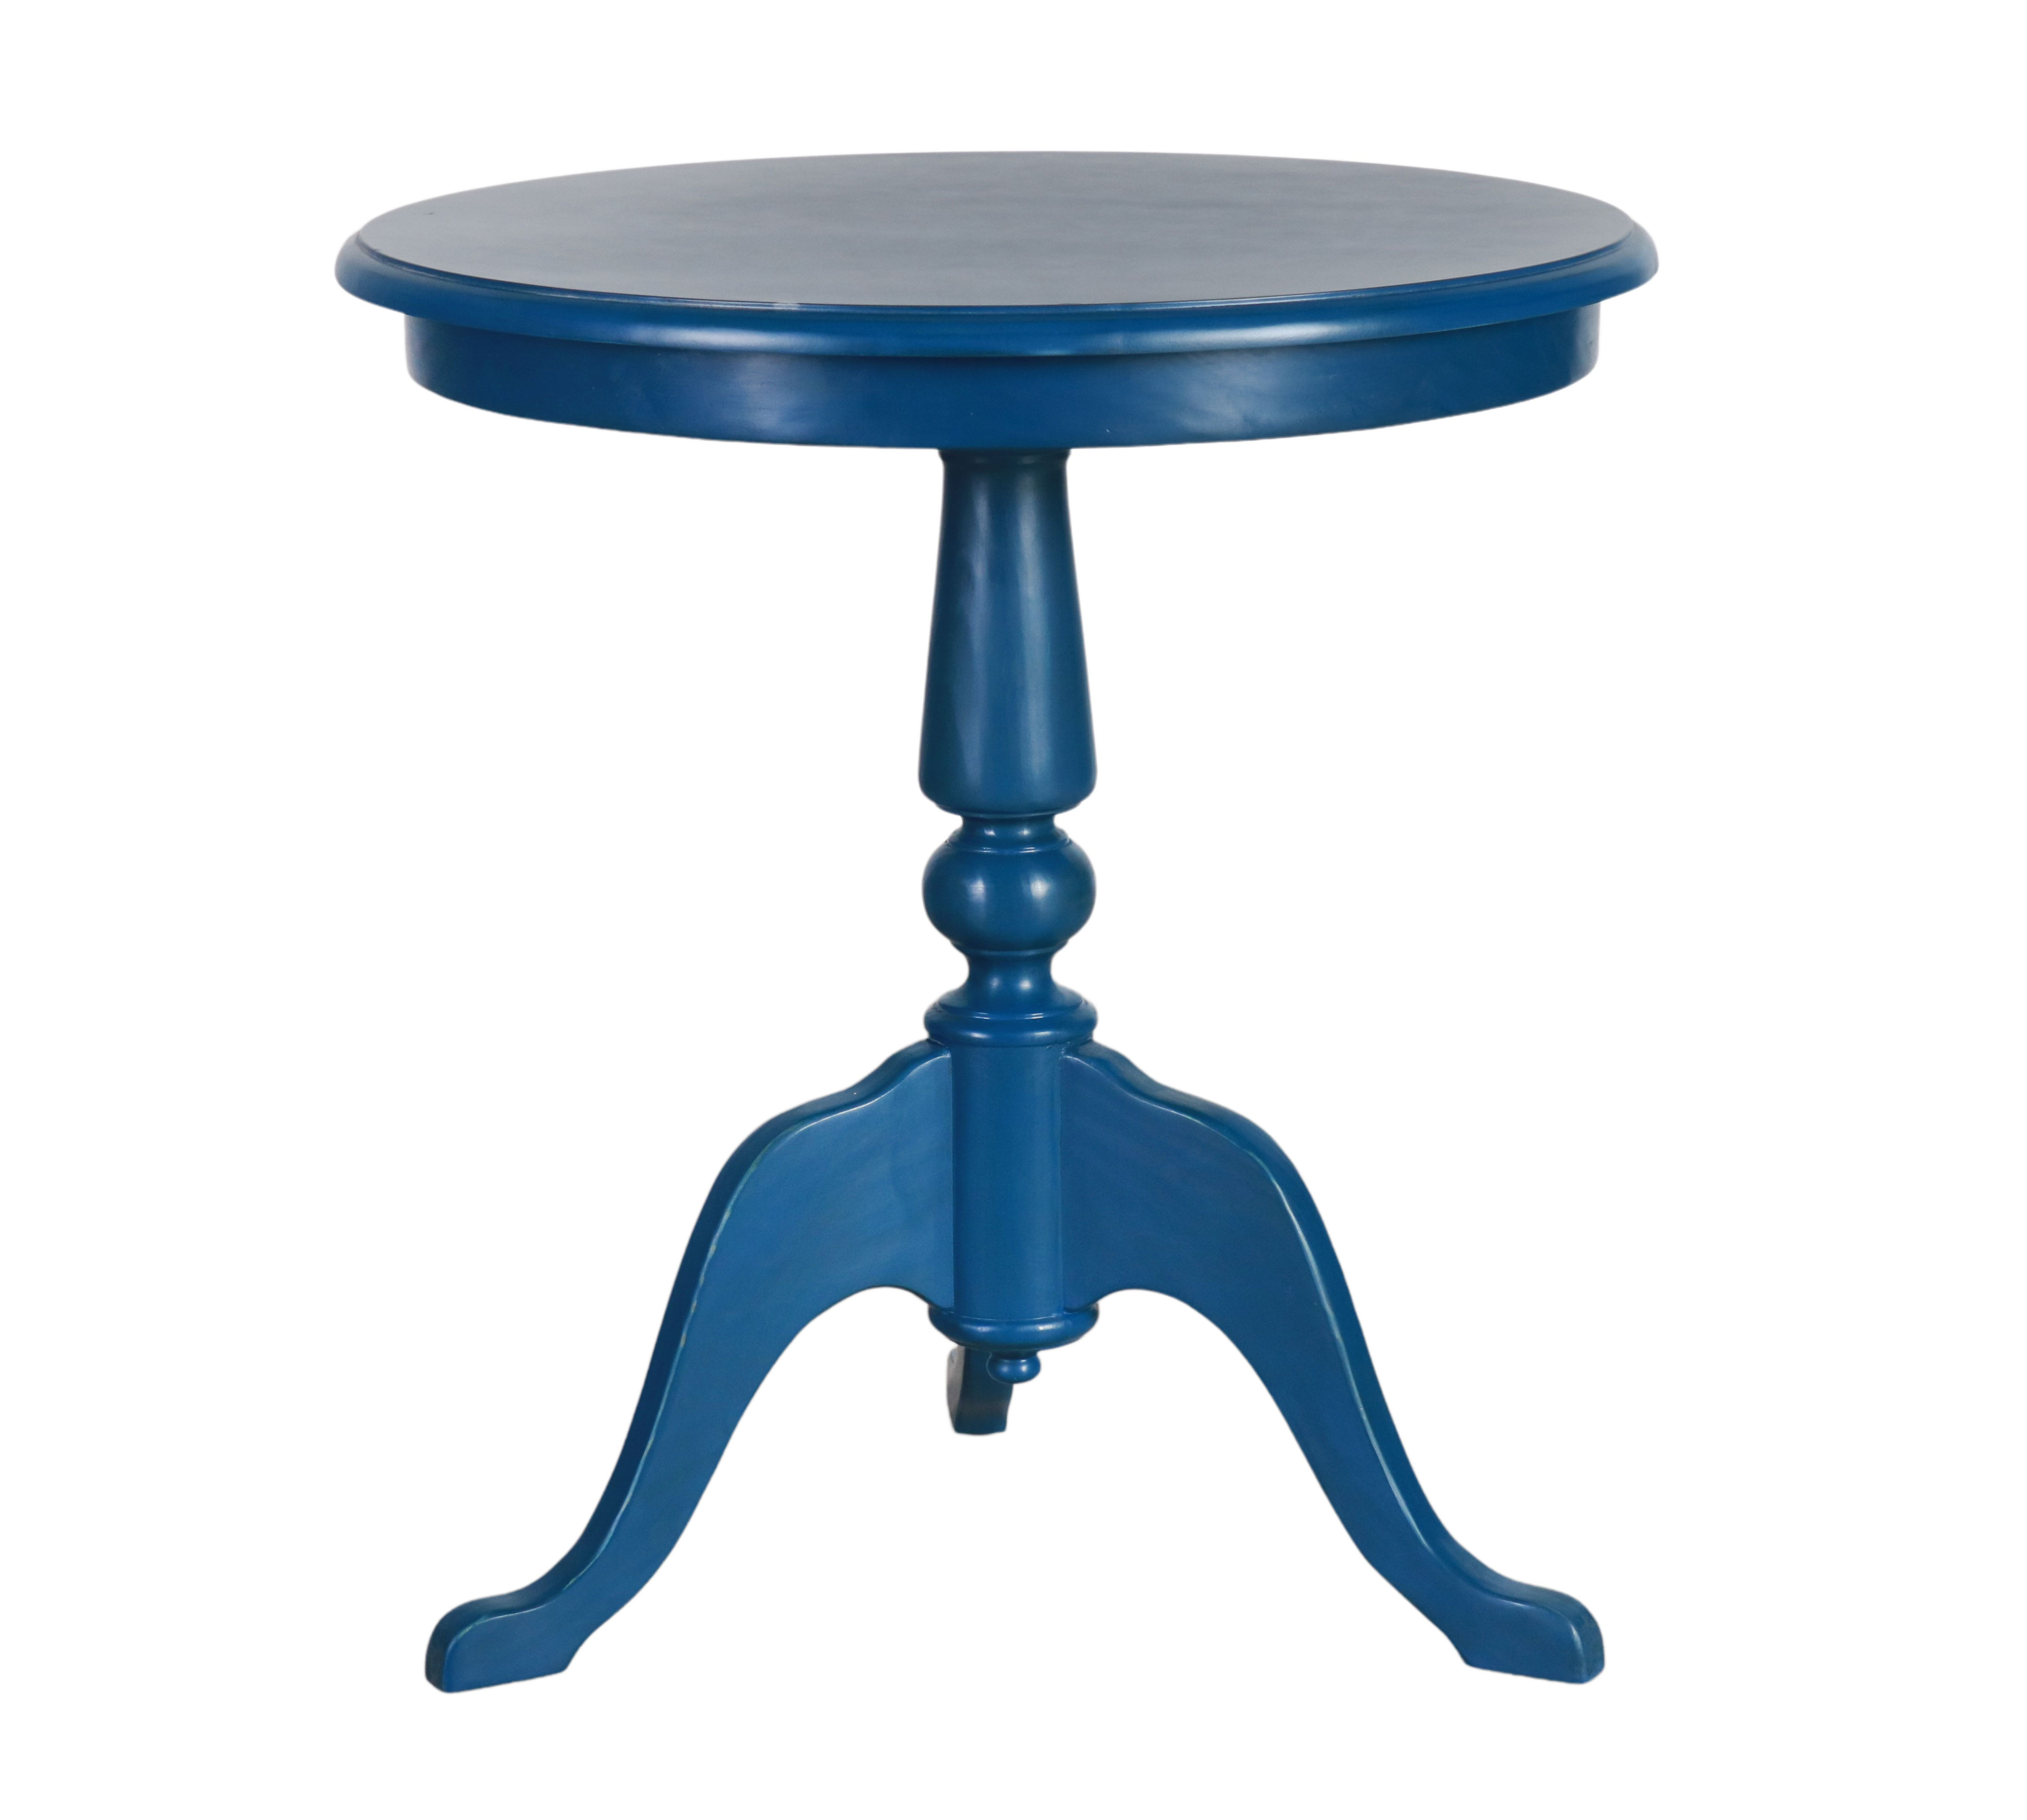 Blue painted kent round table sibley collection 